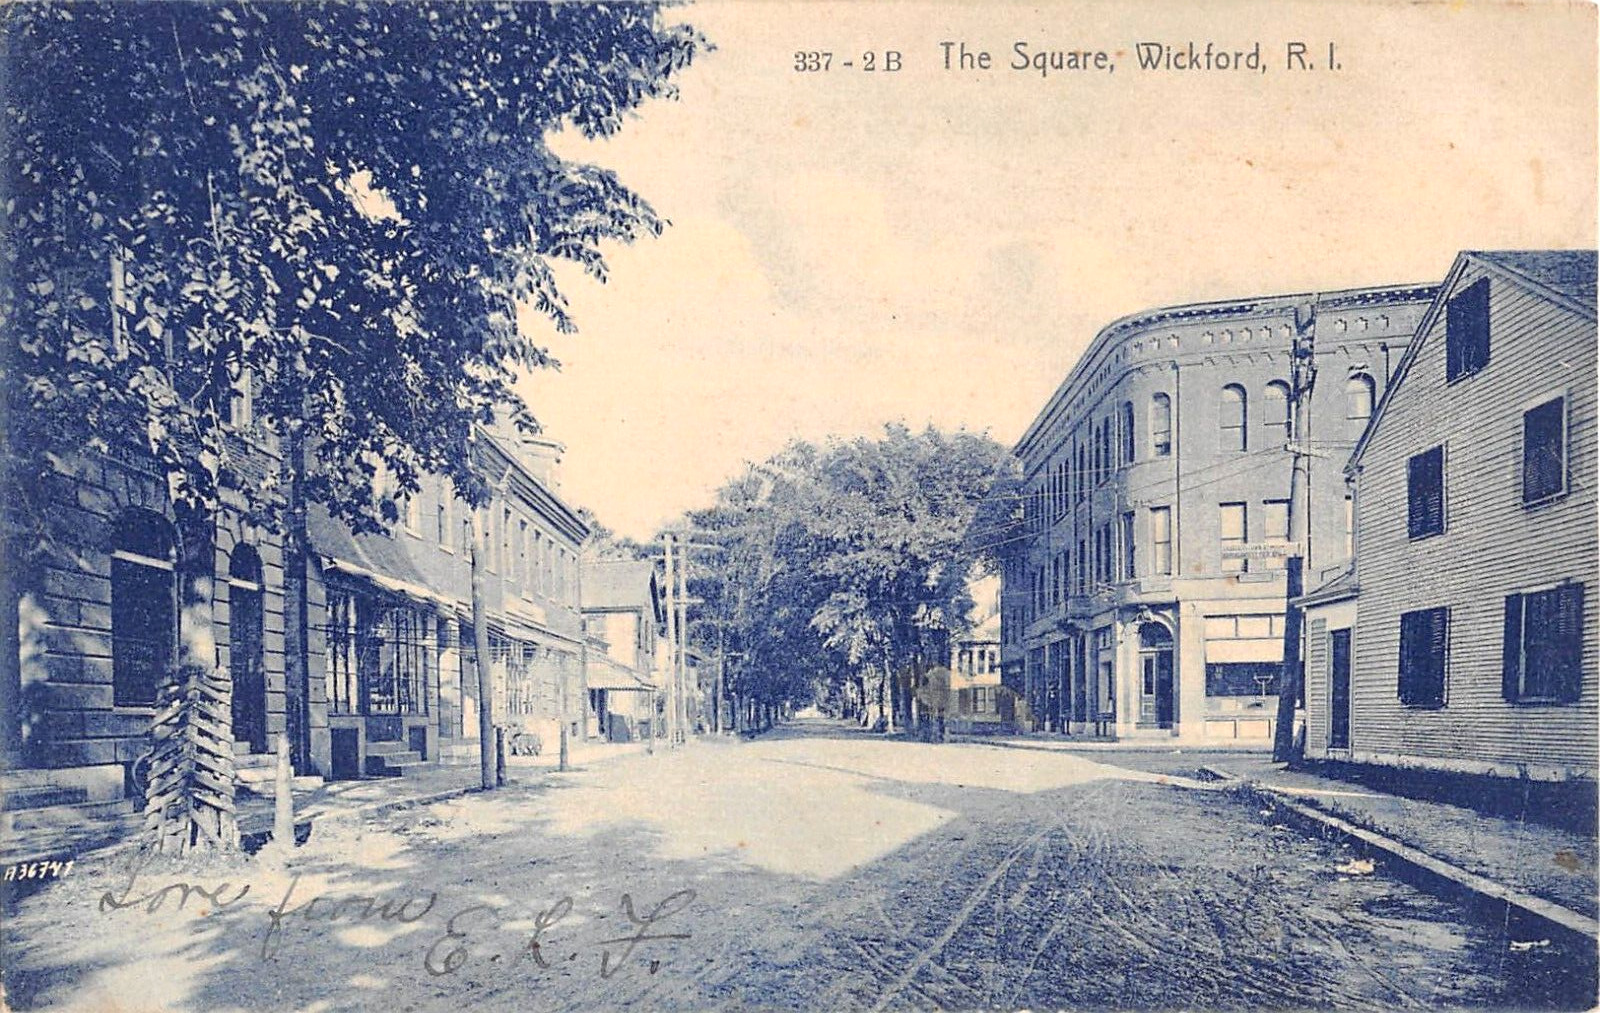 1907 Stores The Square Wickford RI post card